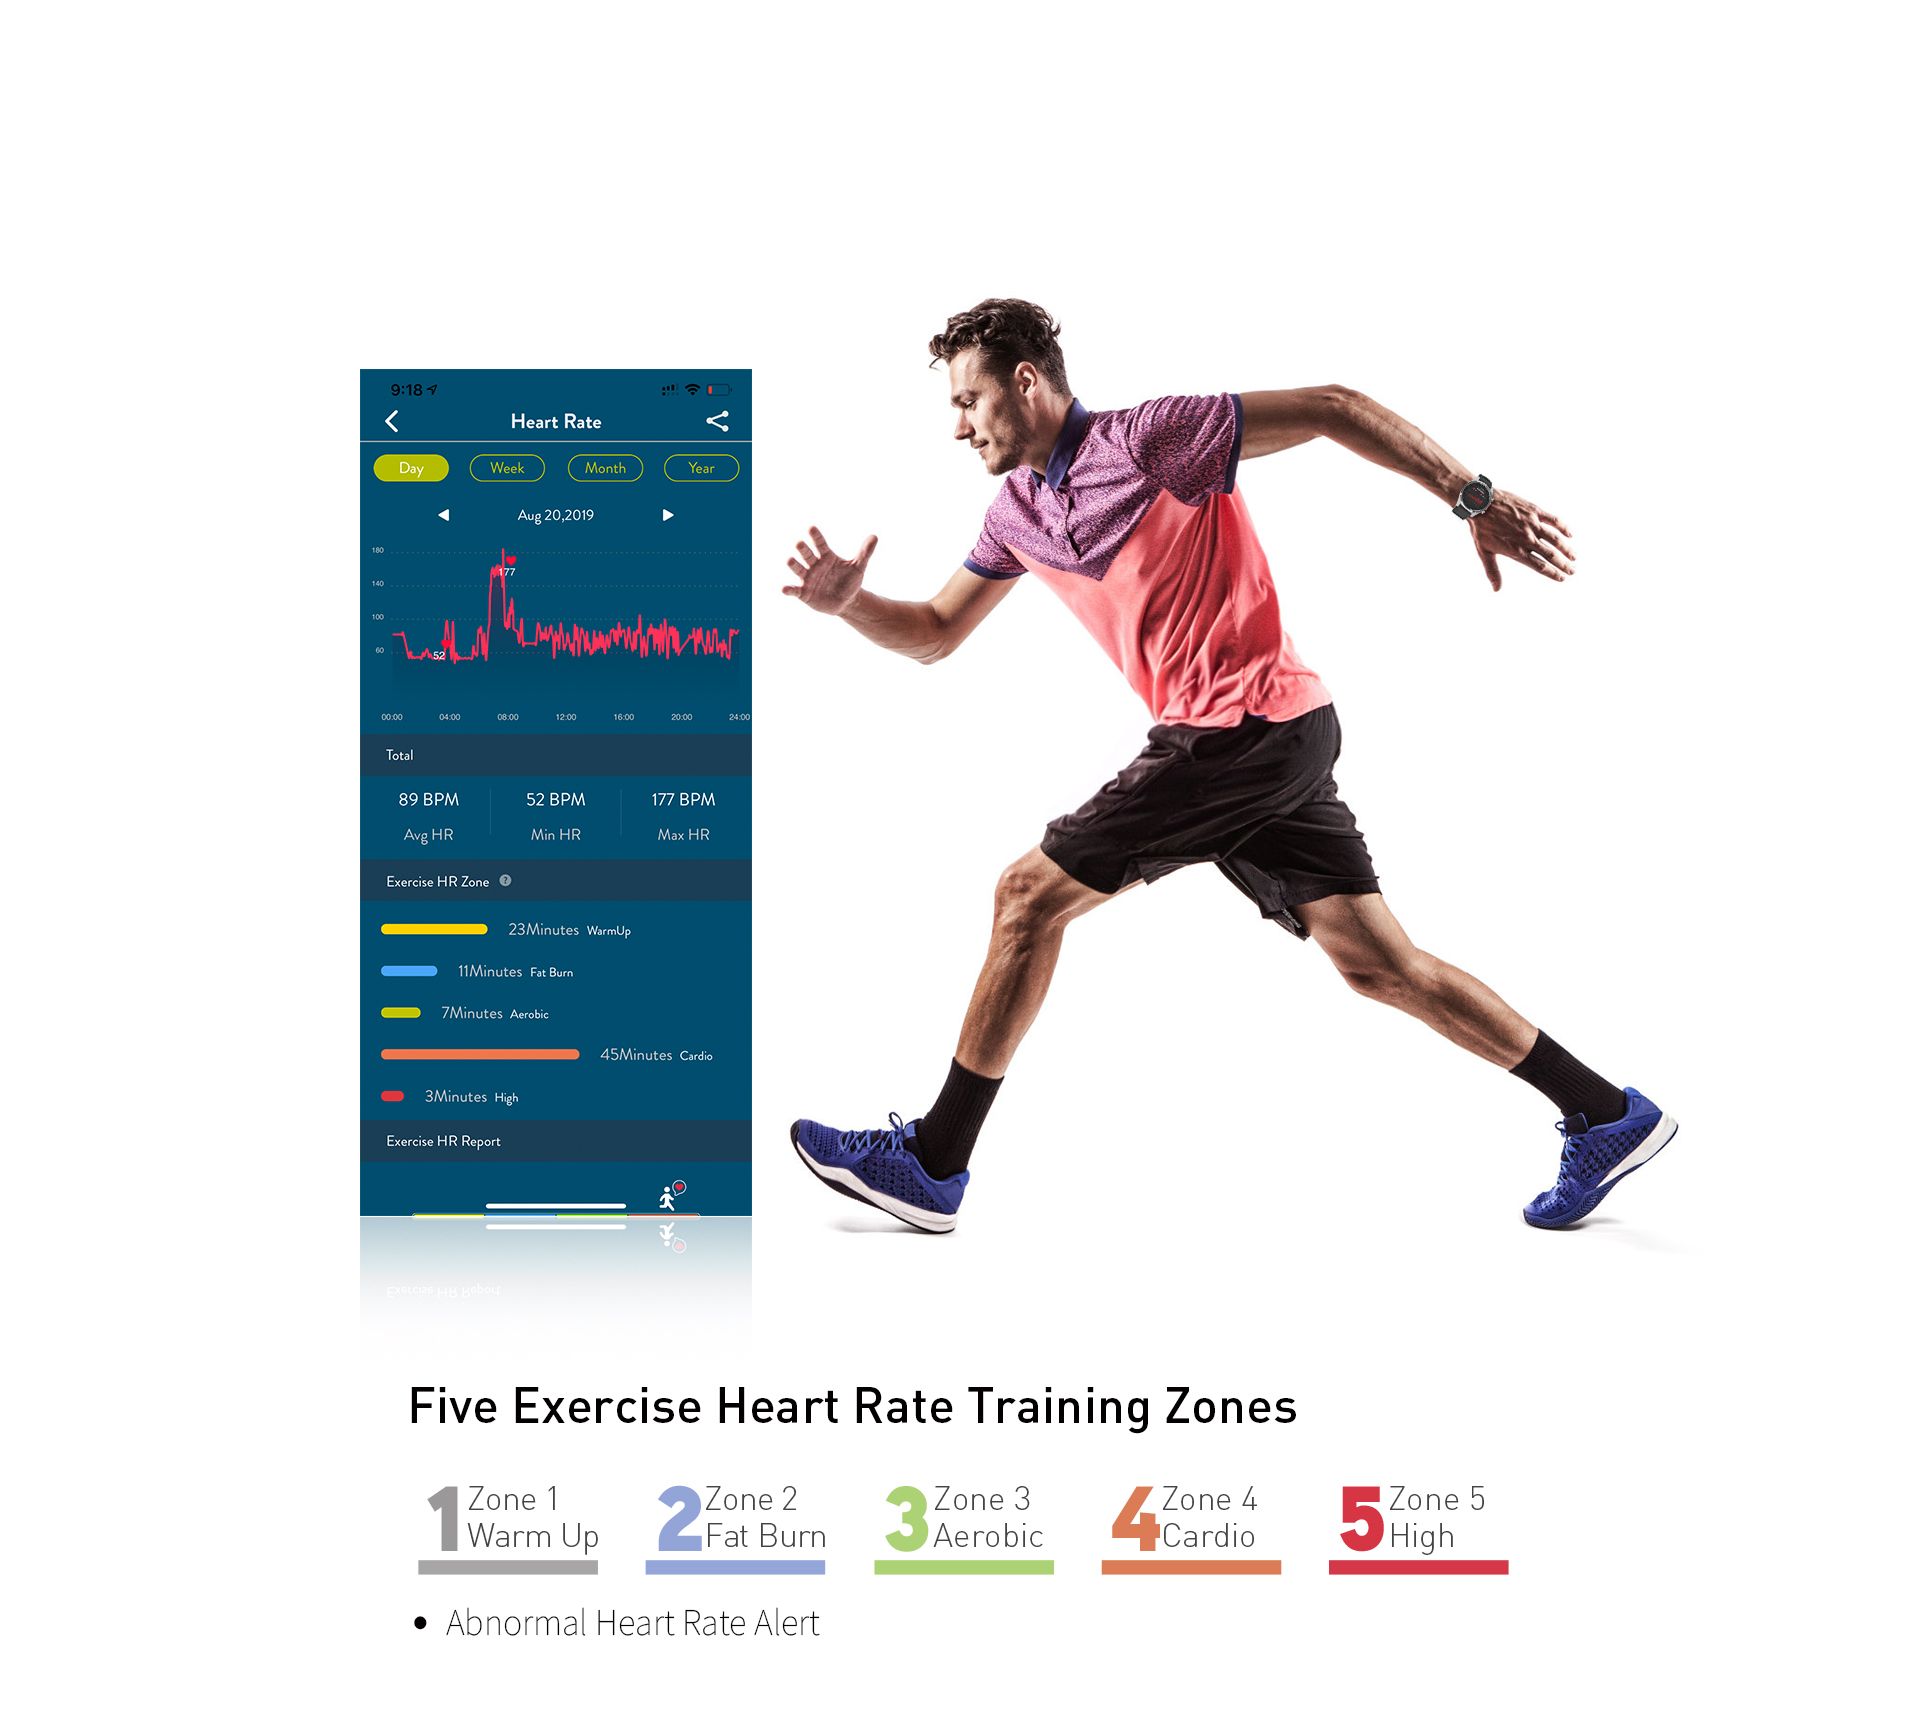 Exercise Heart Rate